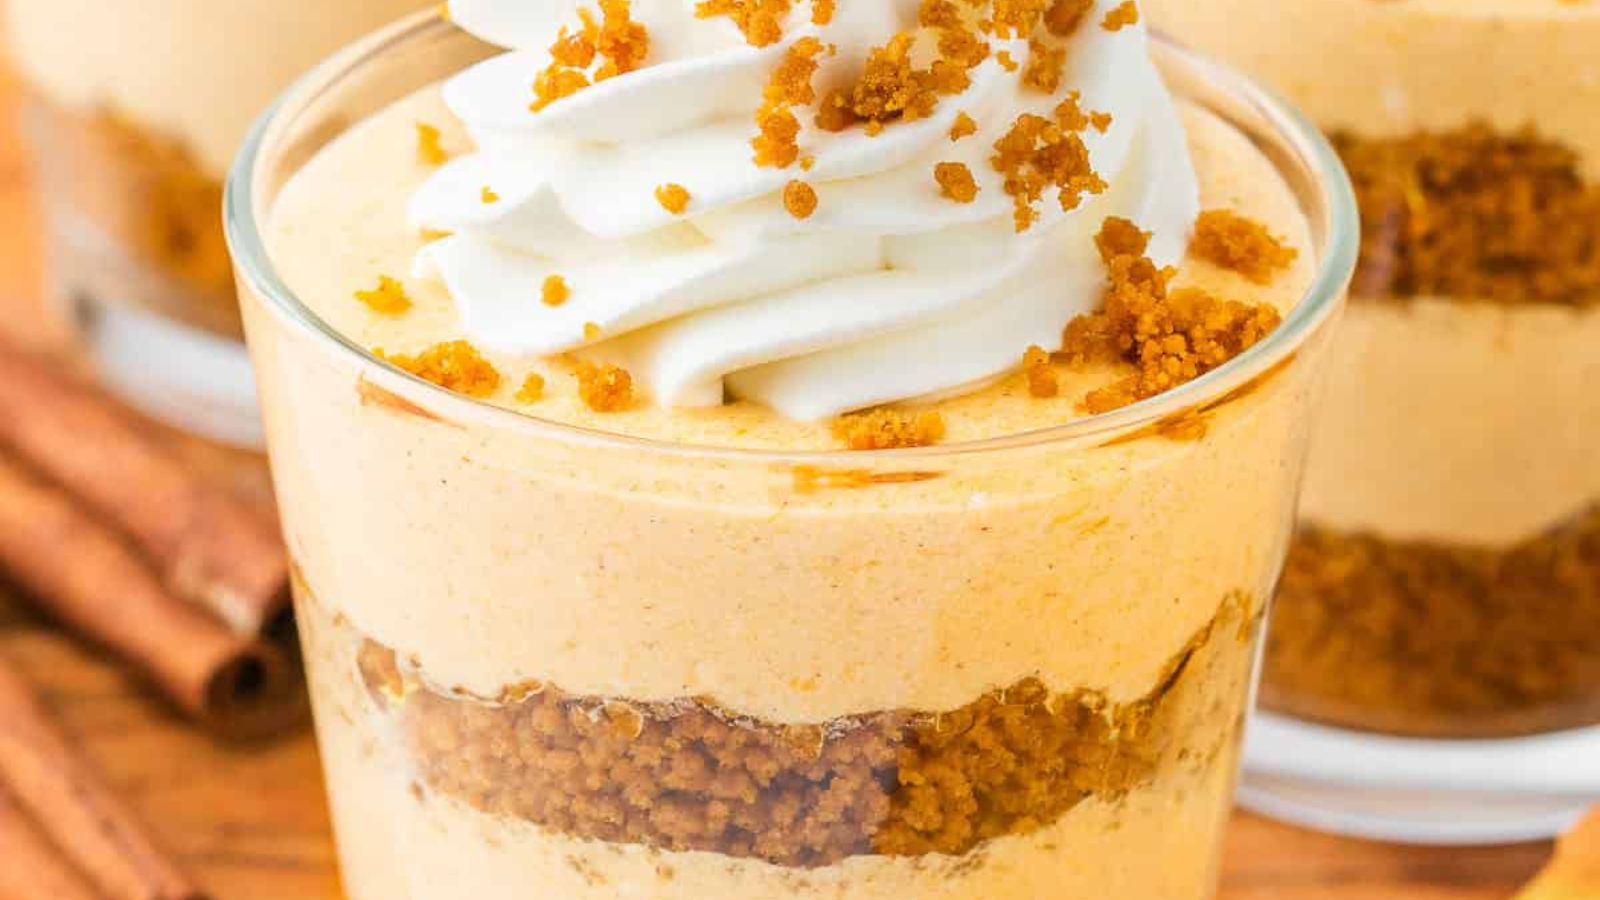 <p>A Pumpkin Pie in a Cup is a fun and easy fall treat! It’s everything you love about pumpkin pie, served up in individual, no-bake dessert cups. These are perfect for Halloween, Thanksgiving, or any holiday event.</p>